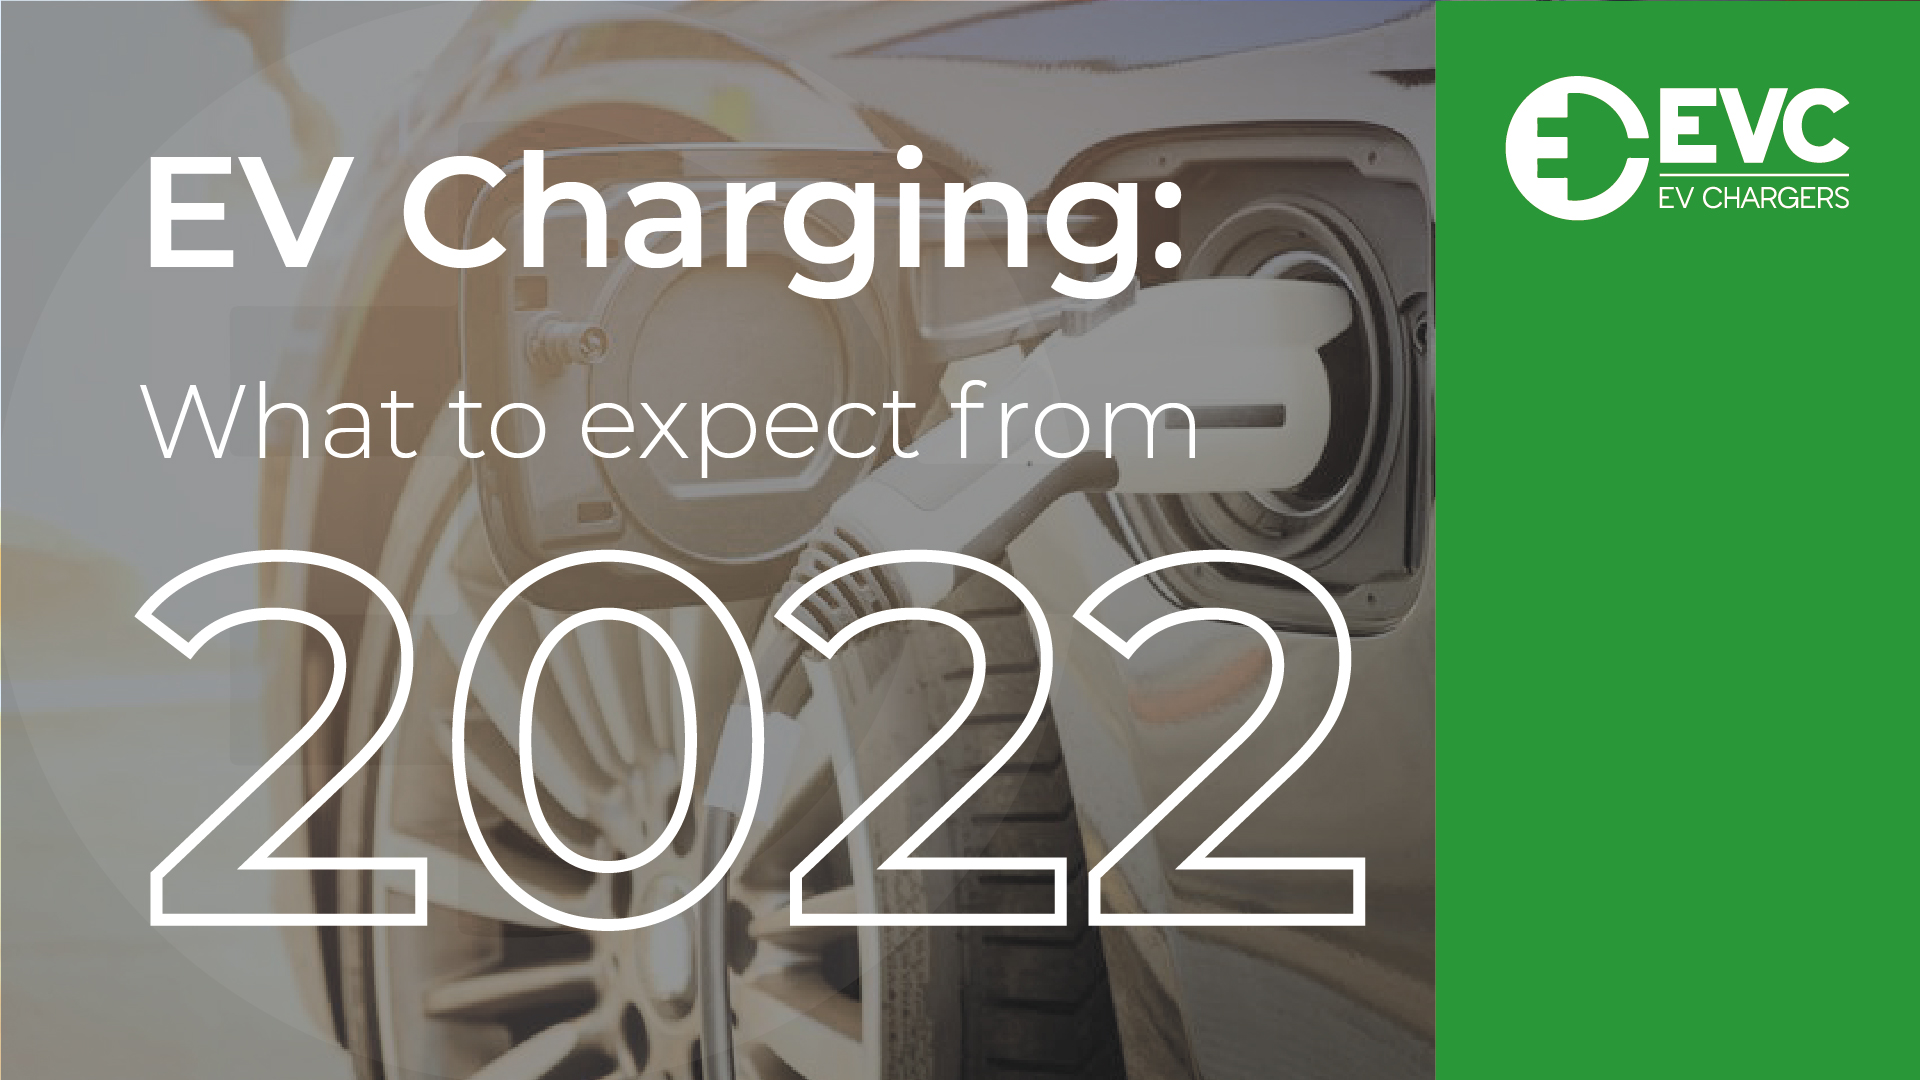 EV Charging: What to expect from 2022